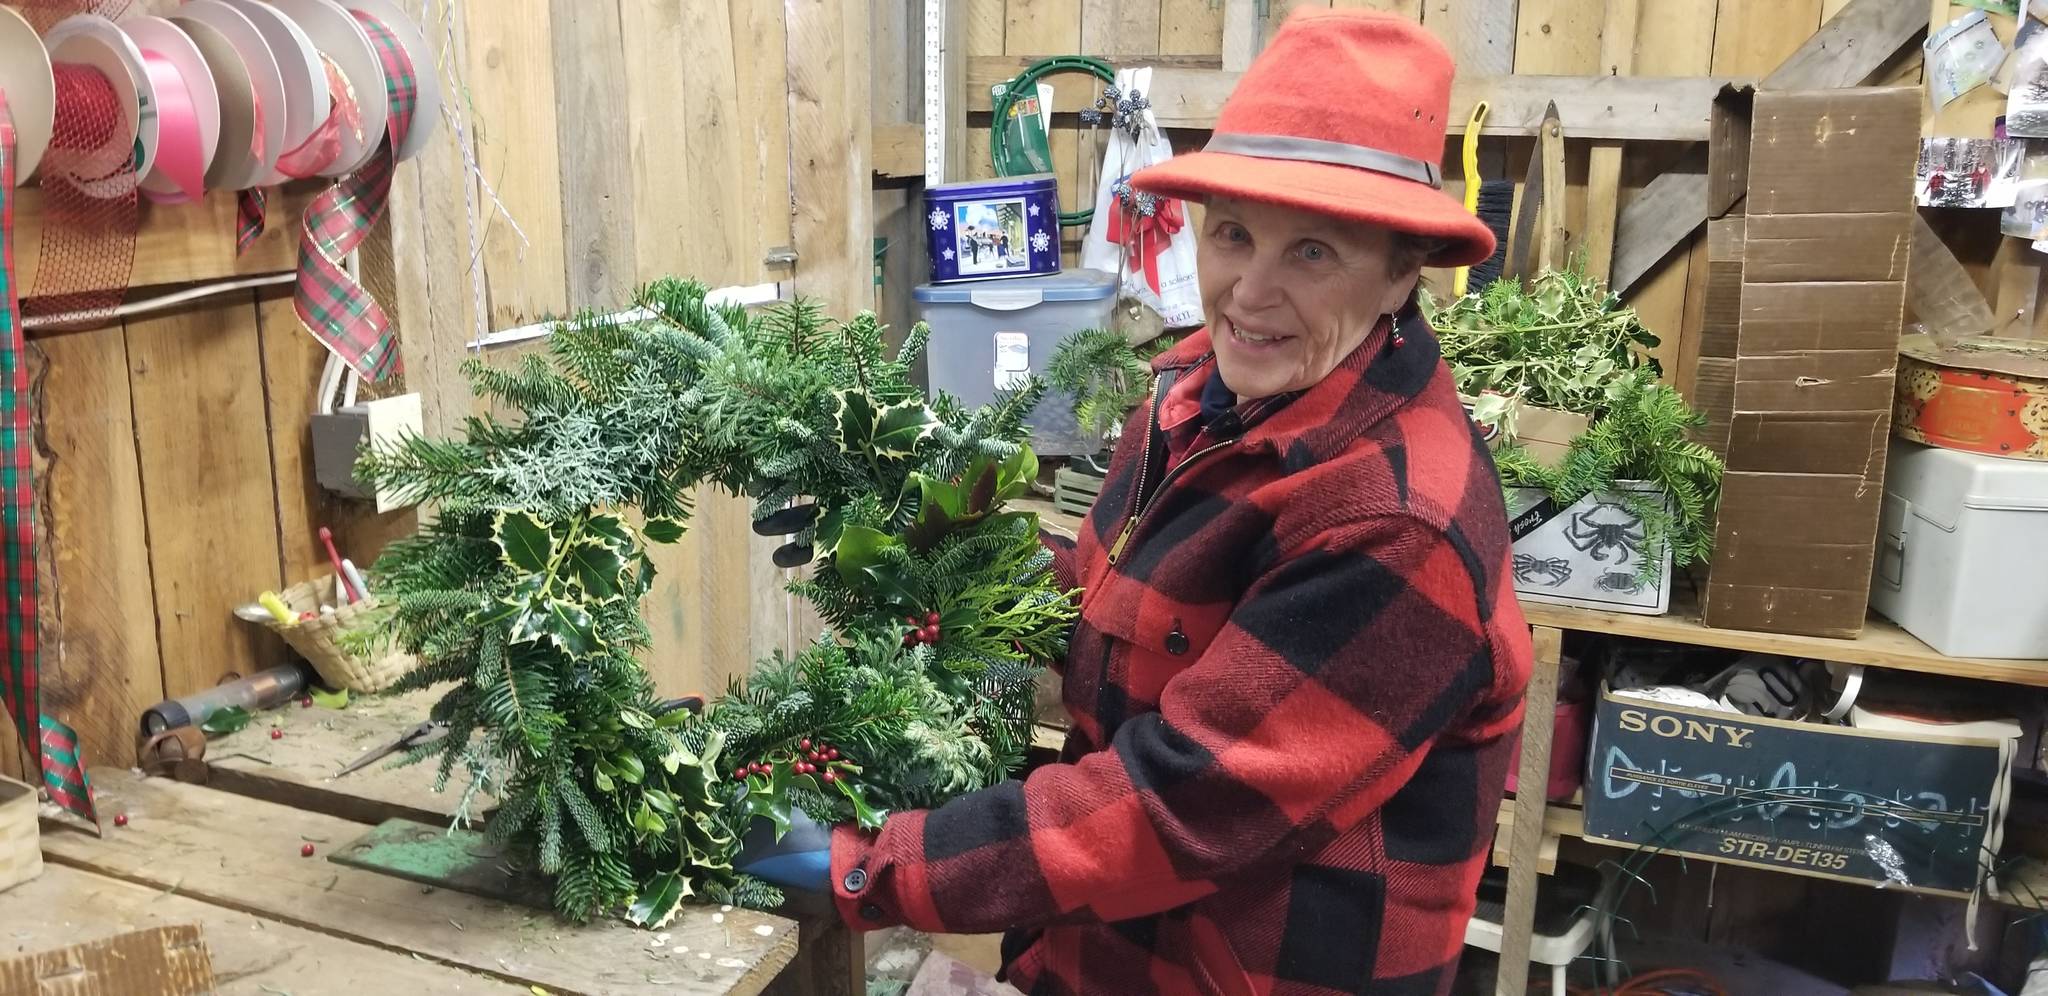 Armstrong shows off one of her handmade “Pacific Northwest” wreaths. Nick Twietmeyer / Kitsap News Group